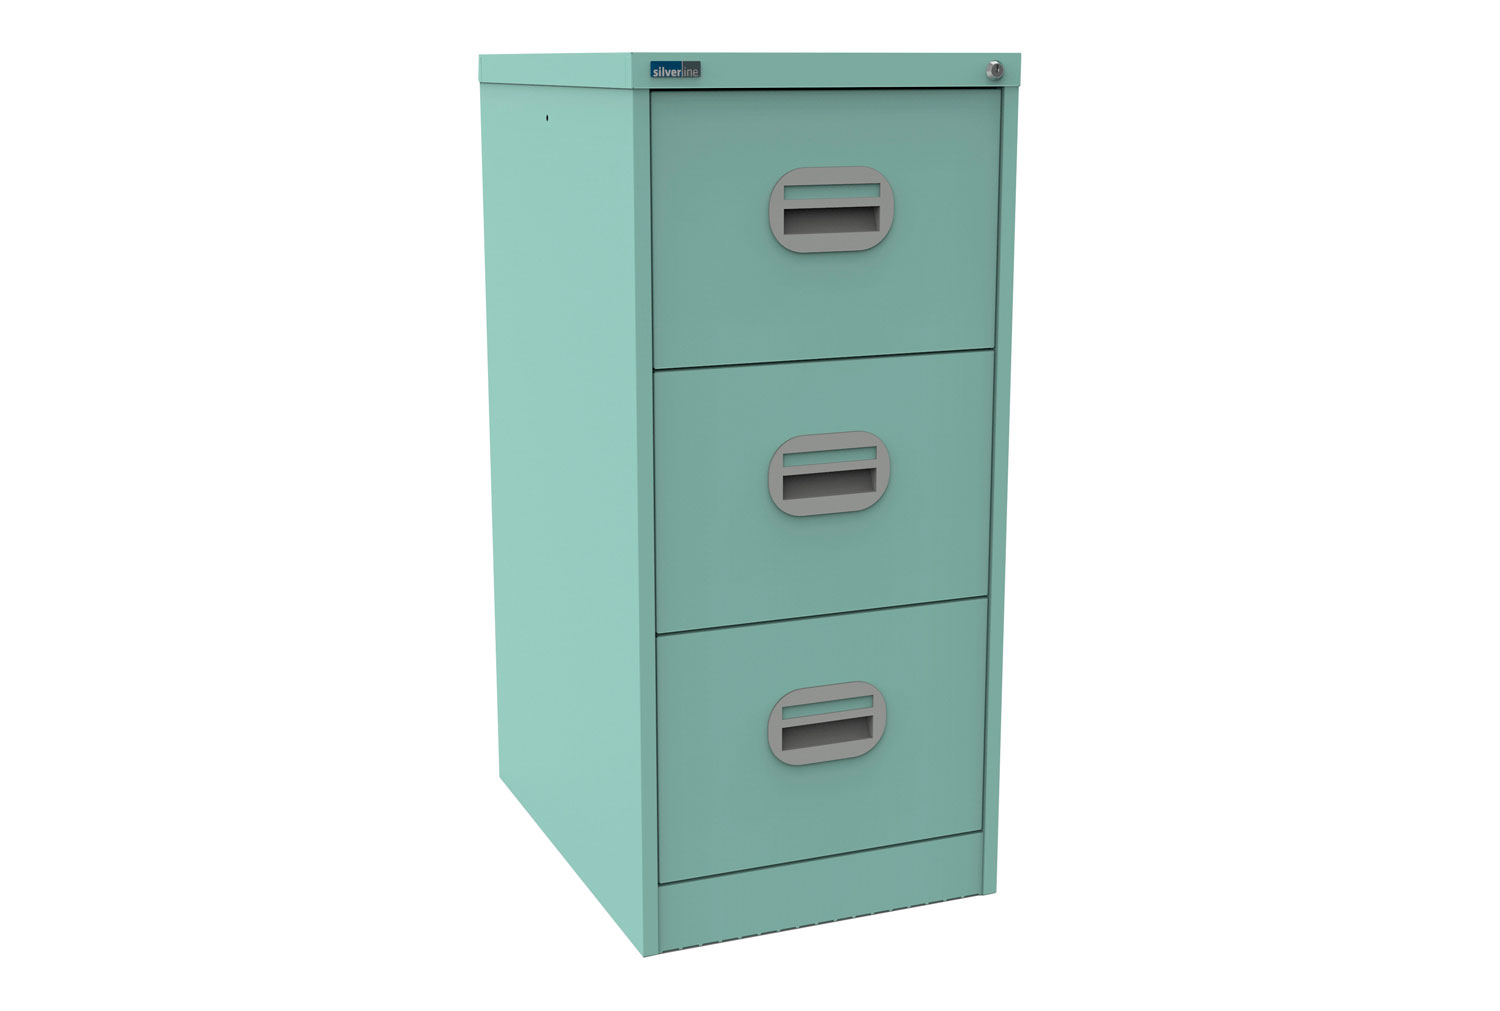 Silverline Kontrax 3 Drawer Filing Cabinet, 3 Drawer - 46wx62dx101h (cm), Peppermint, Fully Installed